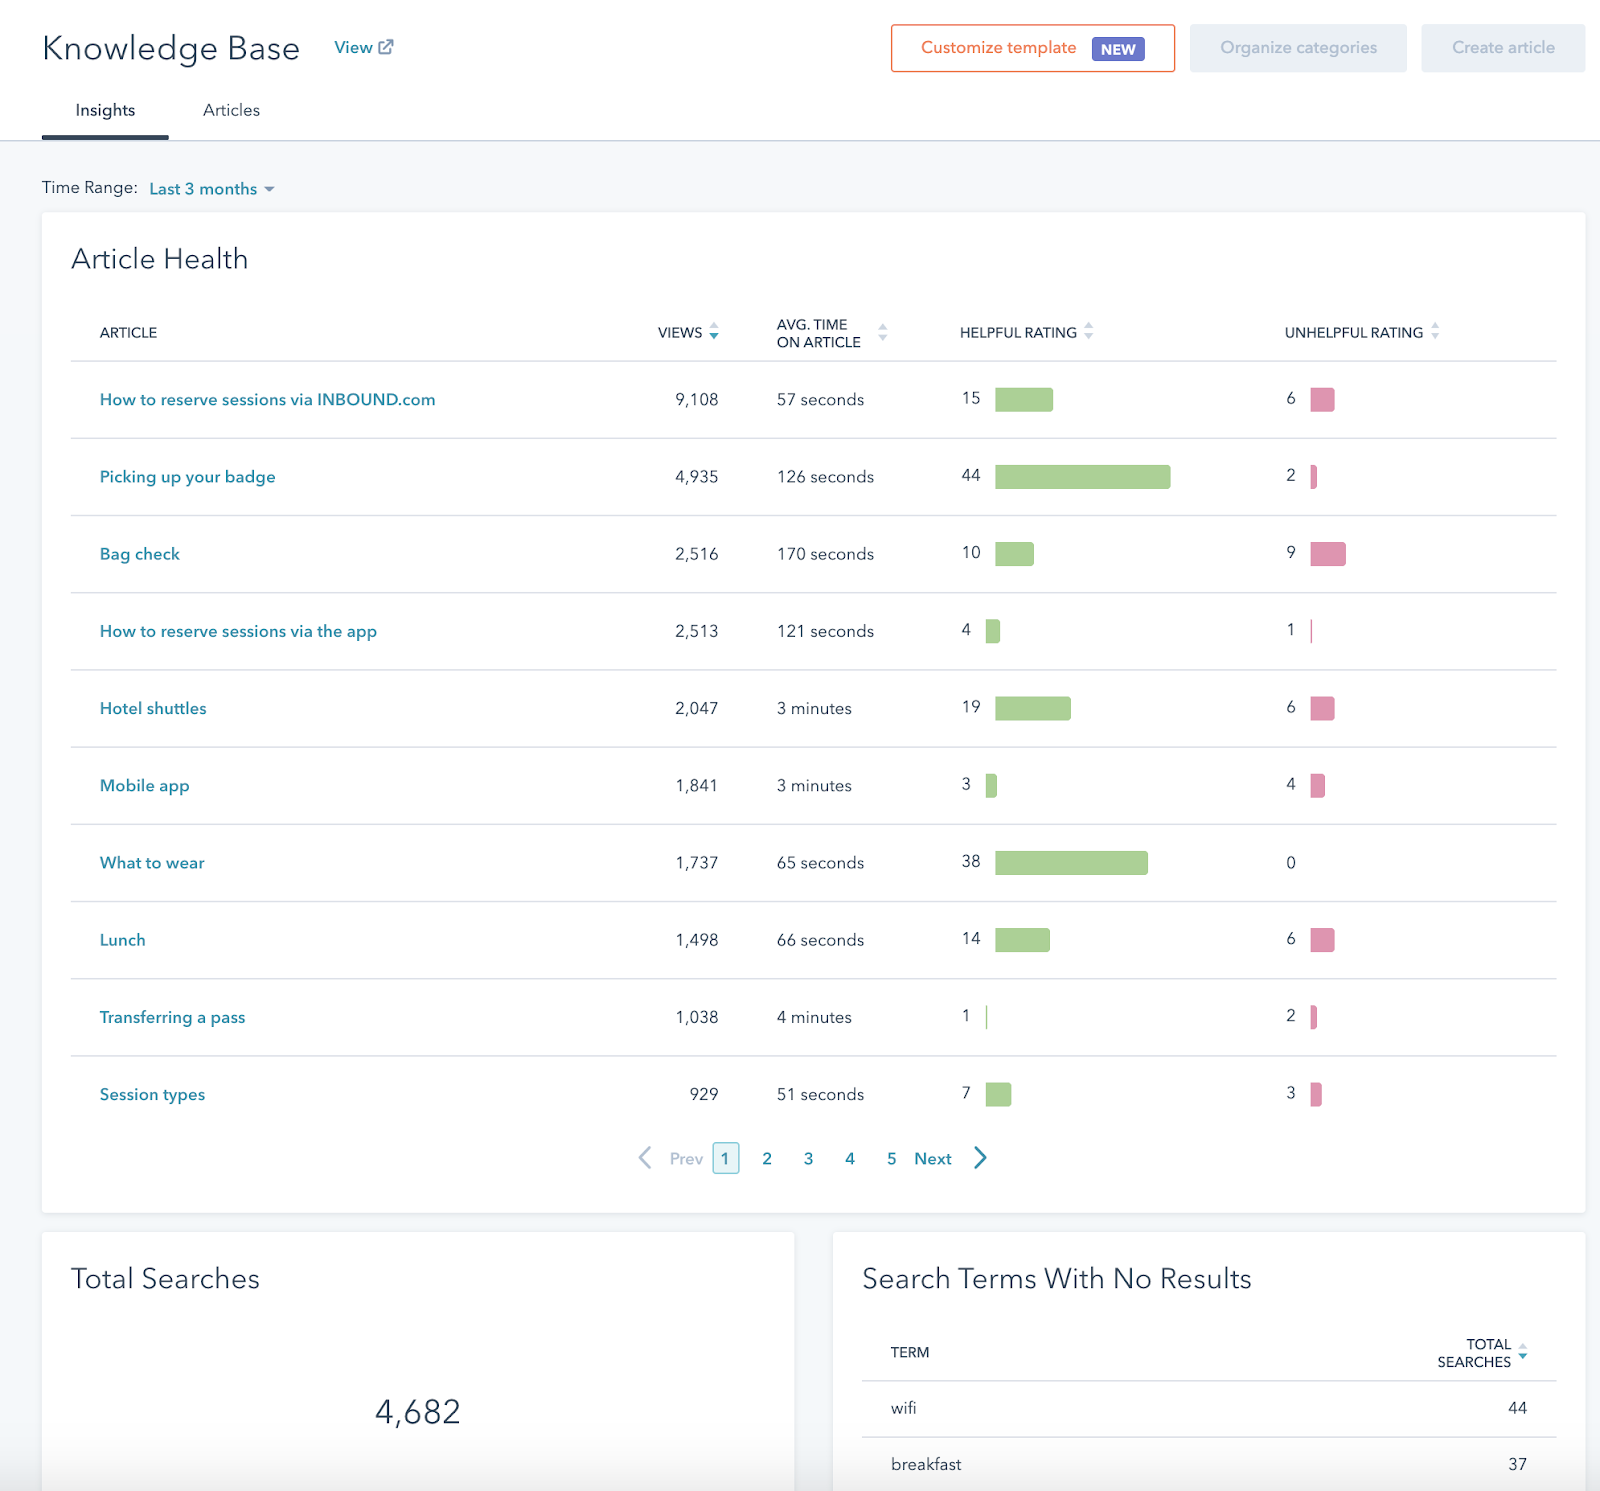 The Knowledge Base insights page